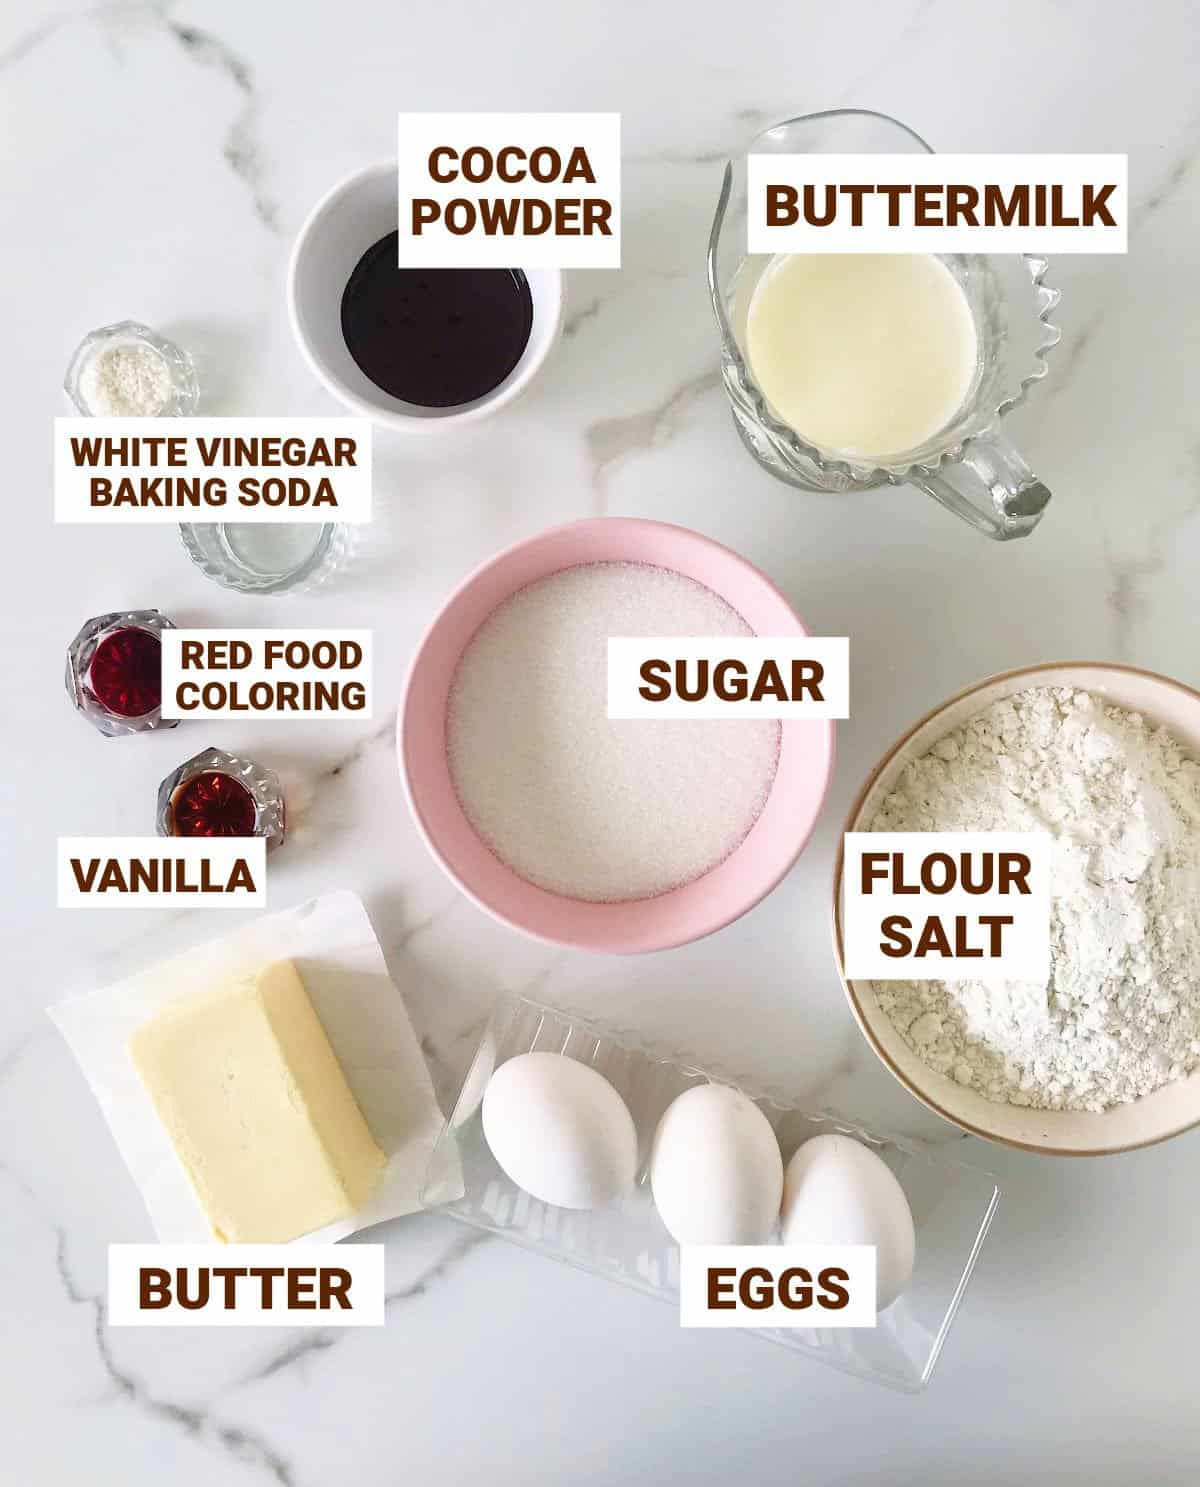 Red velvet cake ingredients in bowls on marble surface including butter, red coloring, buttermilk, vinegar, baking soda, cocoa powder.